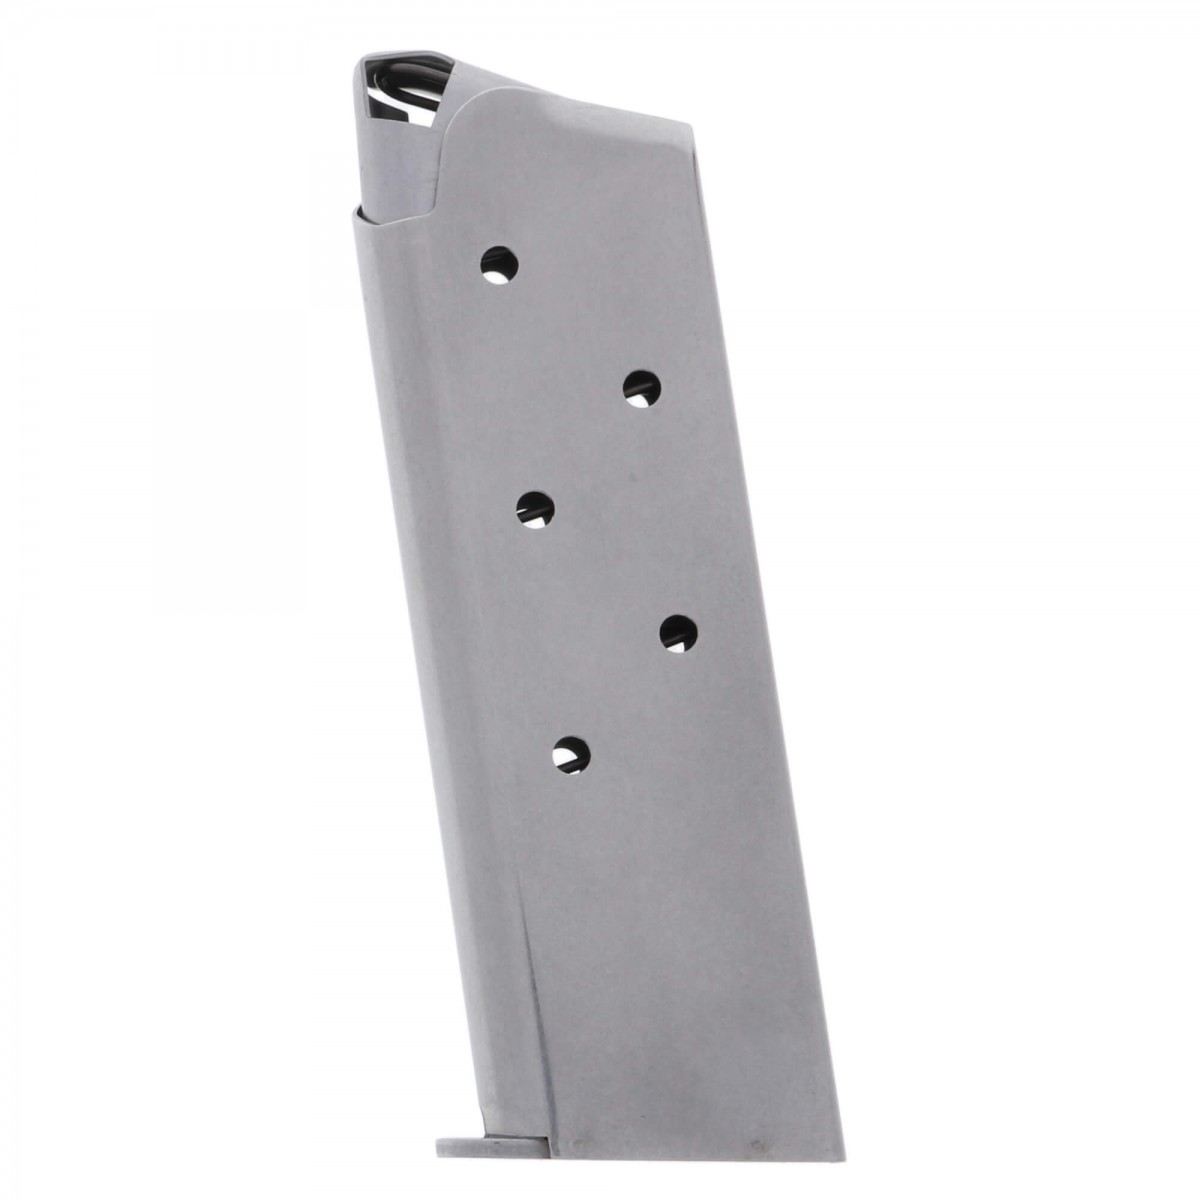 6-Round Magazine 45S.293 Metalform 1911 Officers .45 ACP CRS Welded Base 